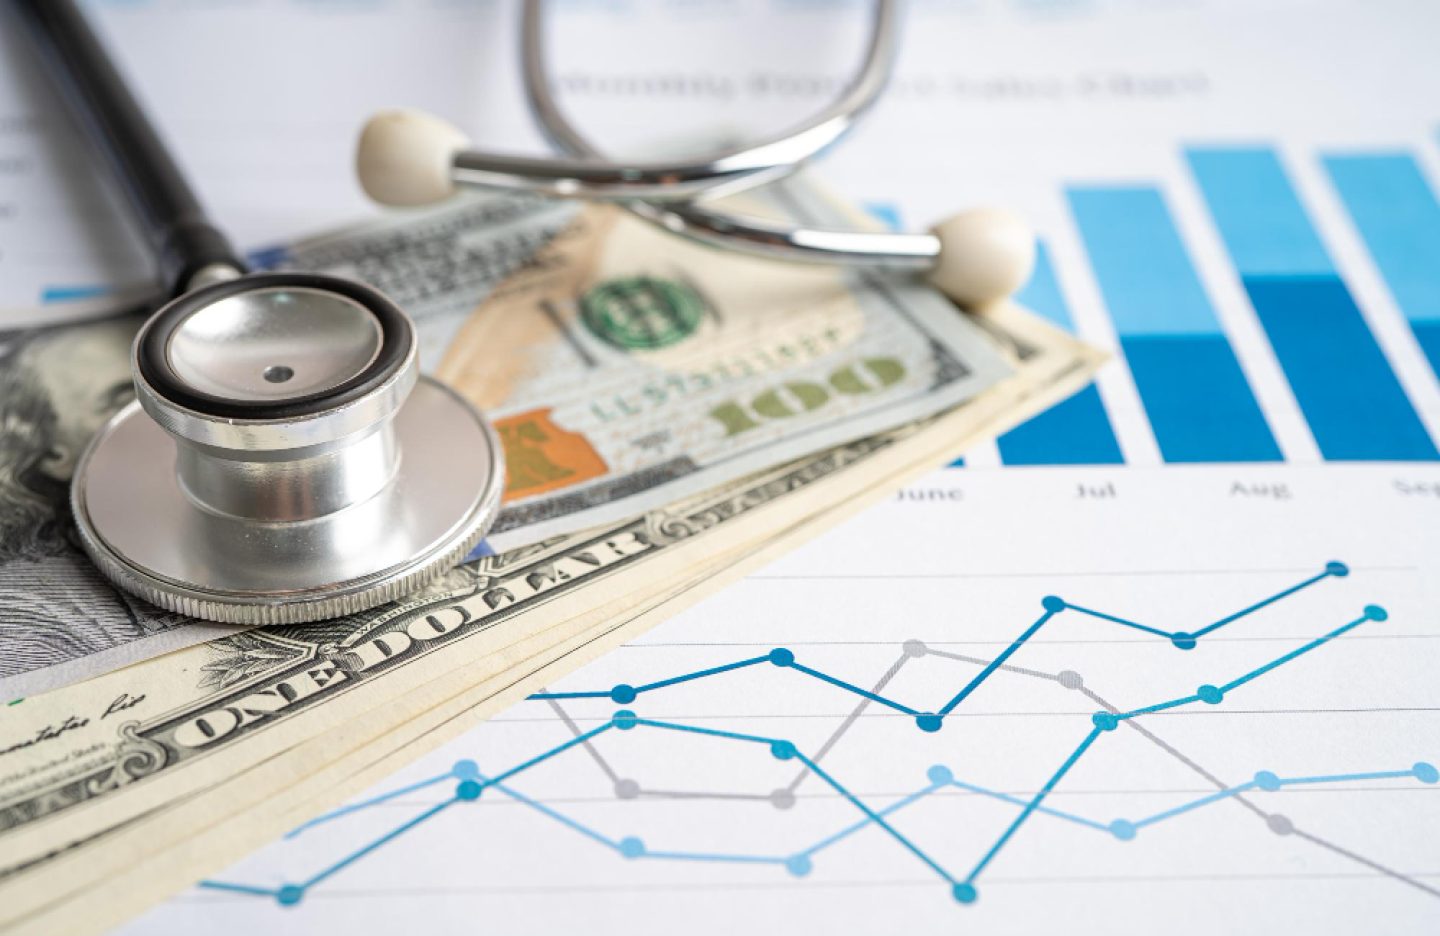 stethoscope-with-us-dollar-banknotes-chart-graph-paper-finance-account-statistics-investment-analytic-research-data-economy-business-company-concept